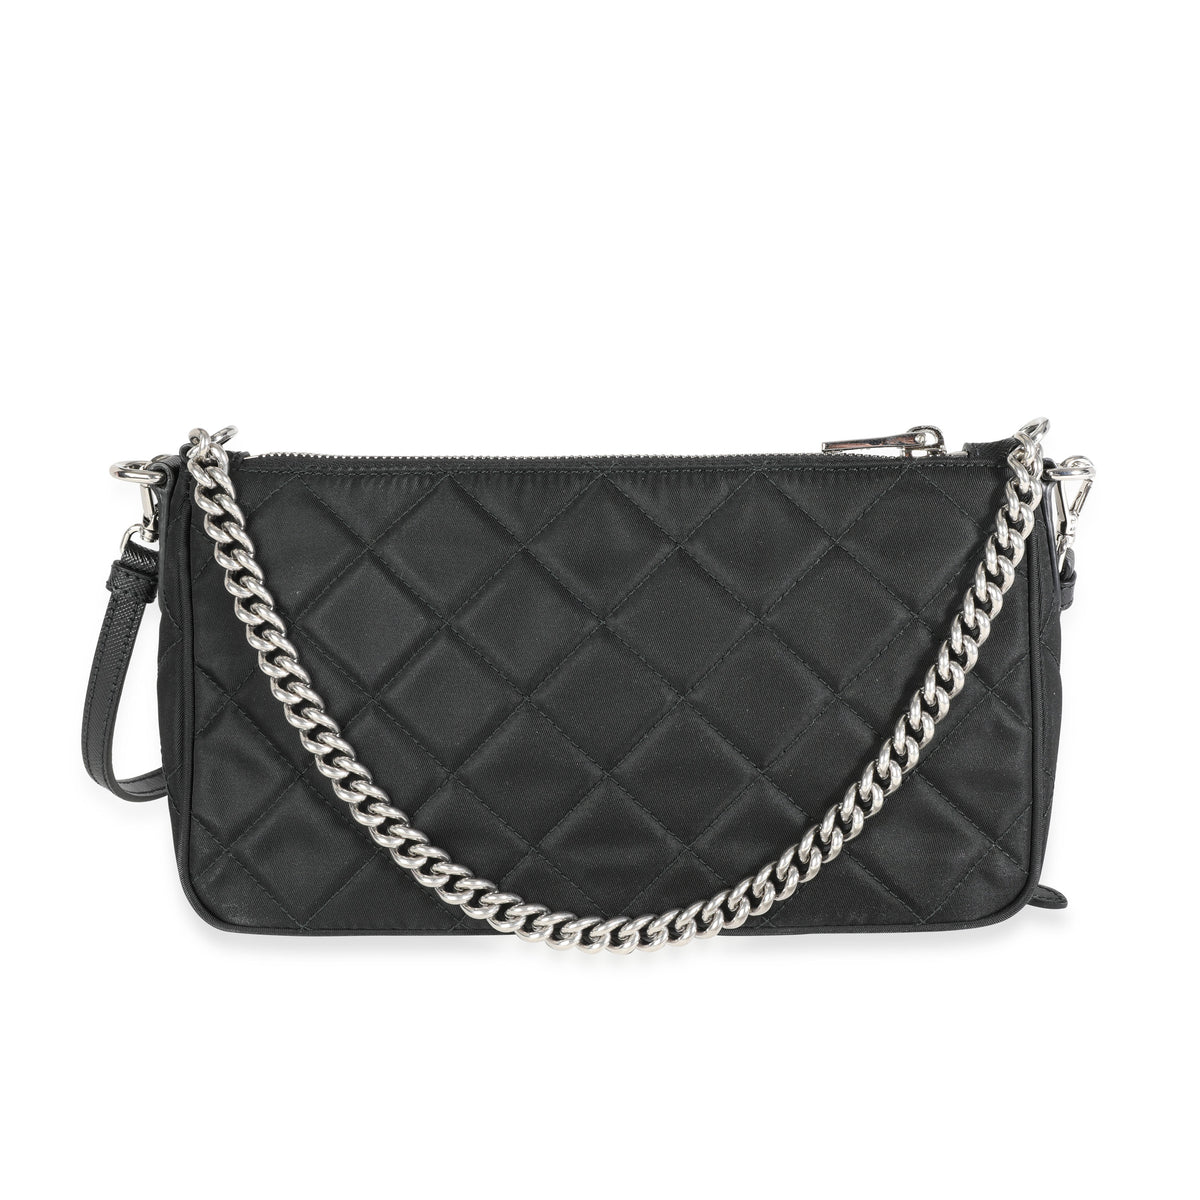 Pink Chanel Bags, Luxury Resale, myGemma – Page 2